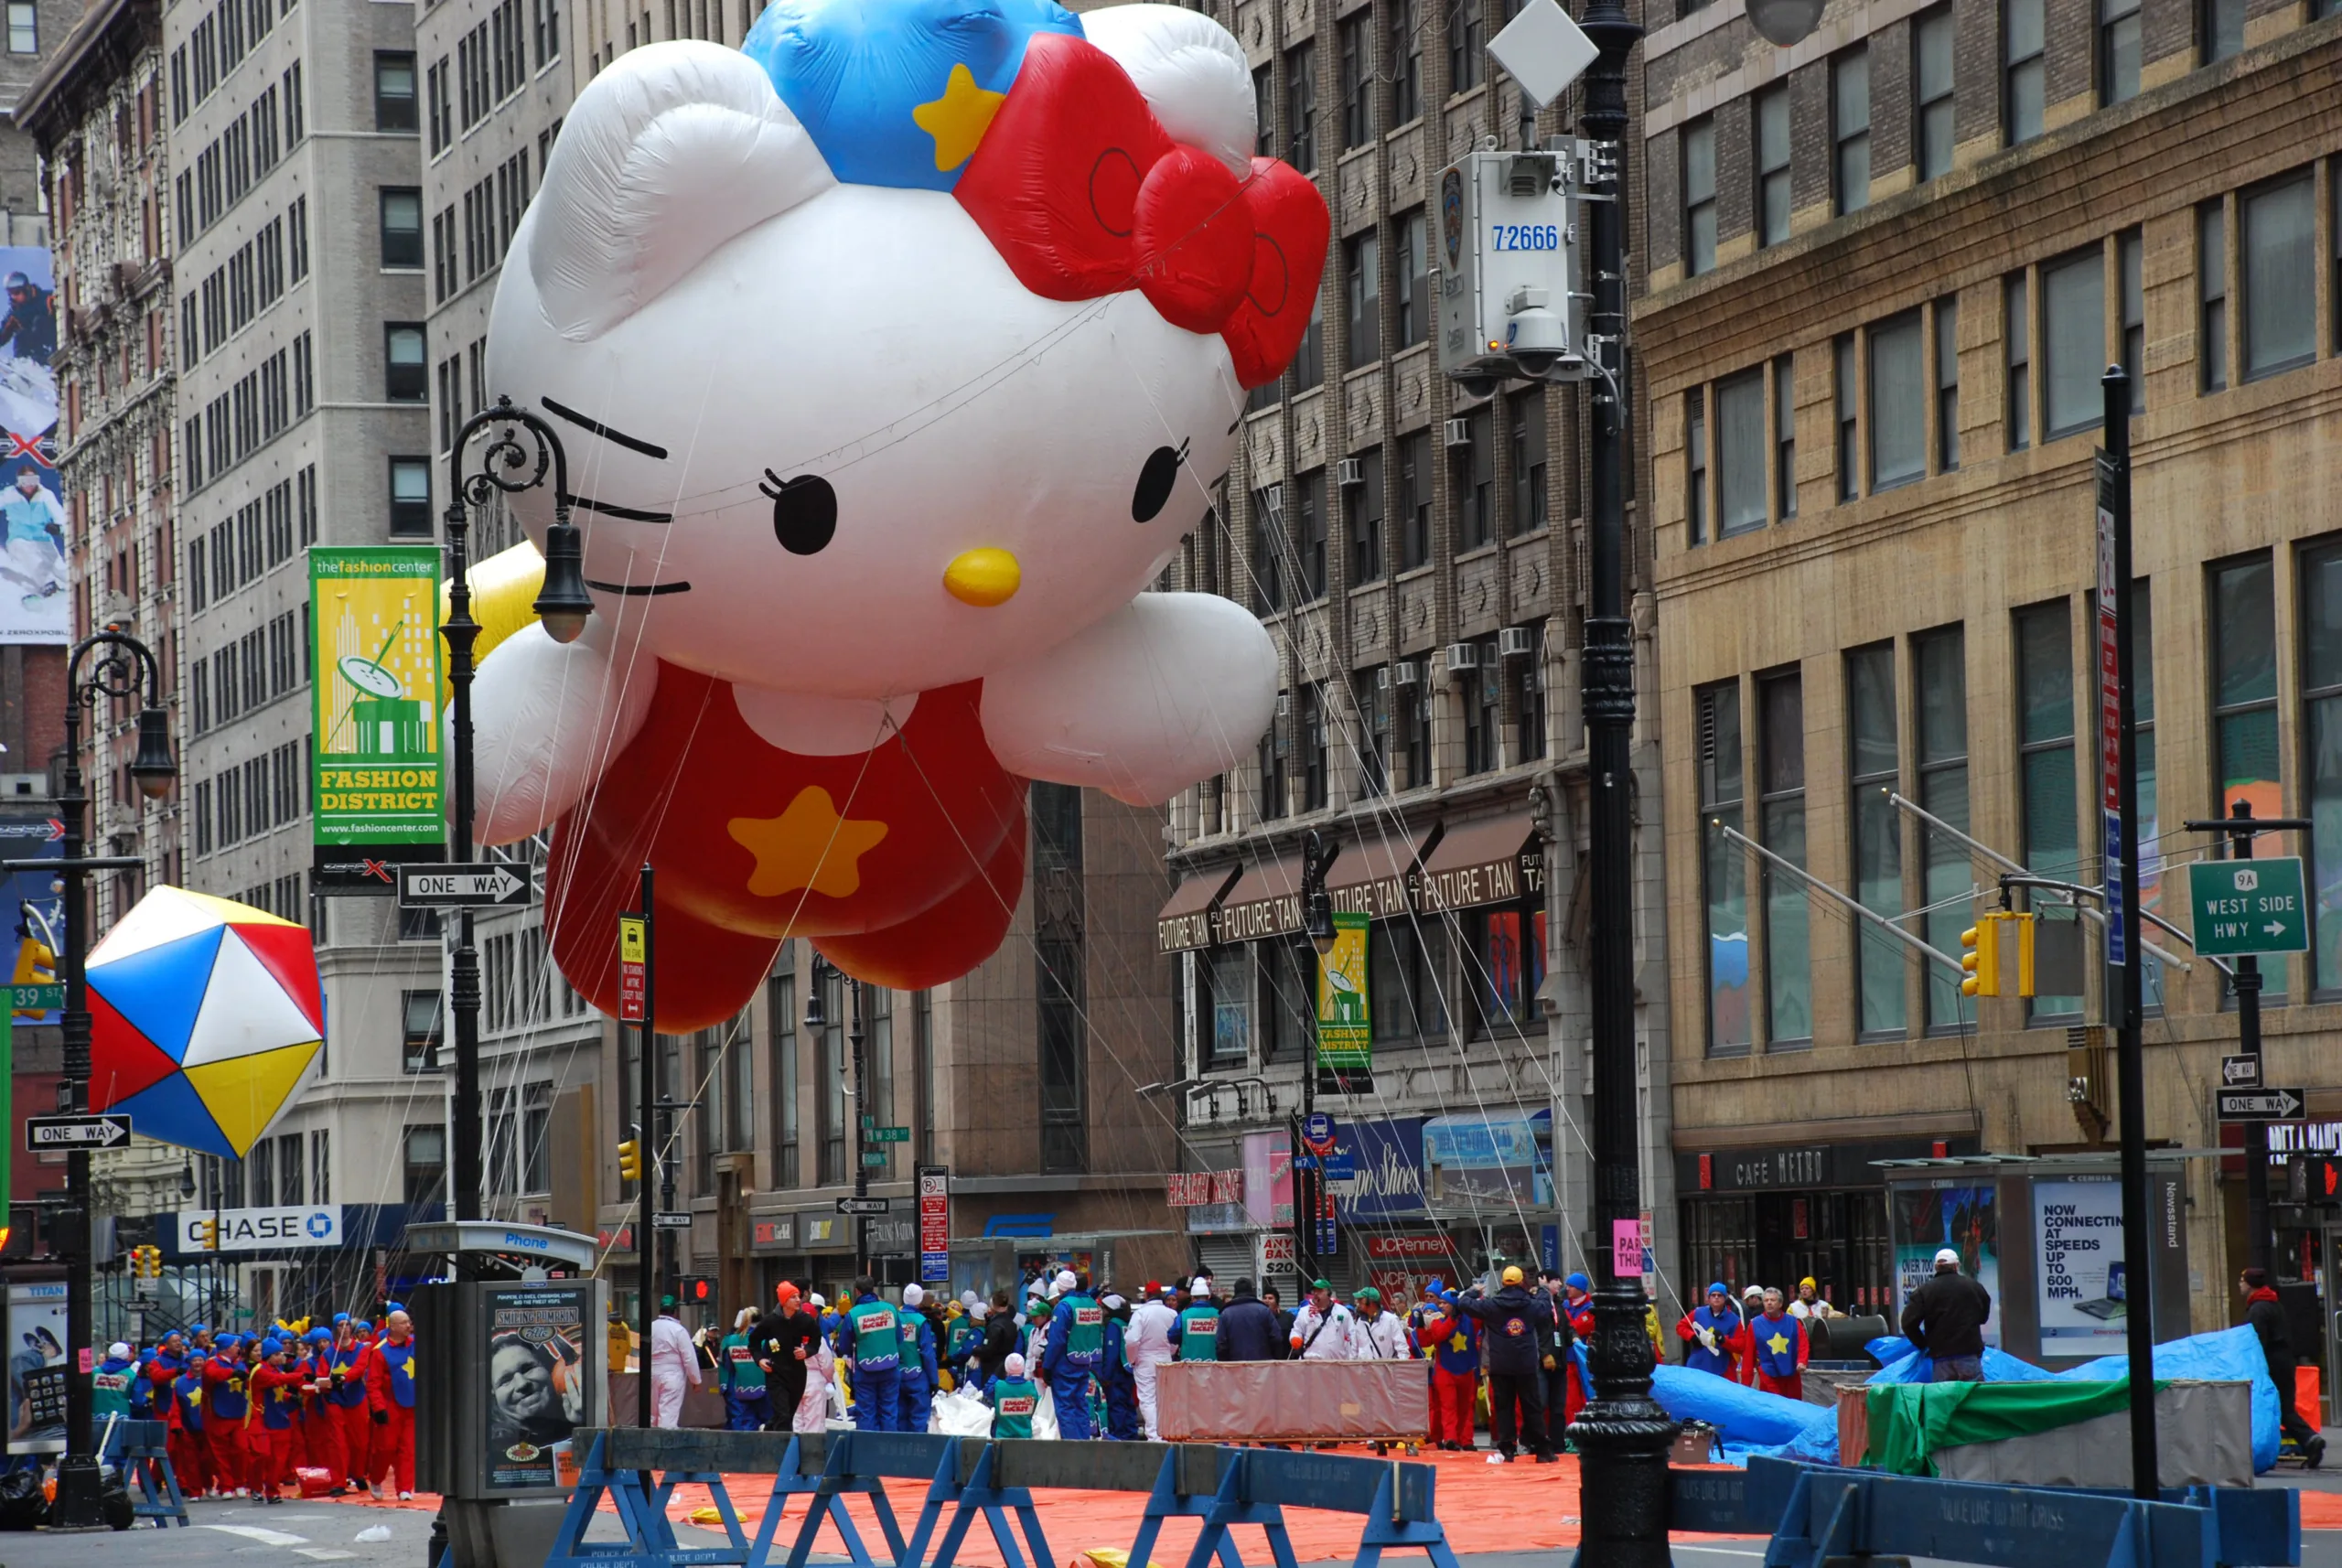 Spectators watching a Hello Kitty balloon at Thanksgiving Day Parade in New York City